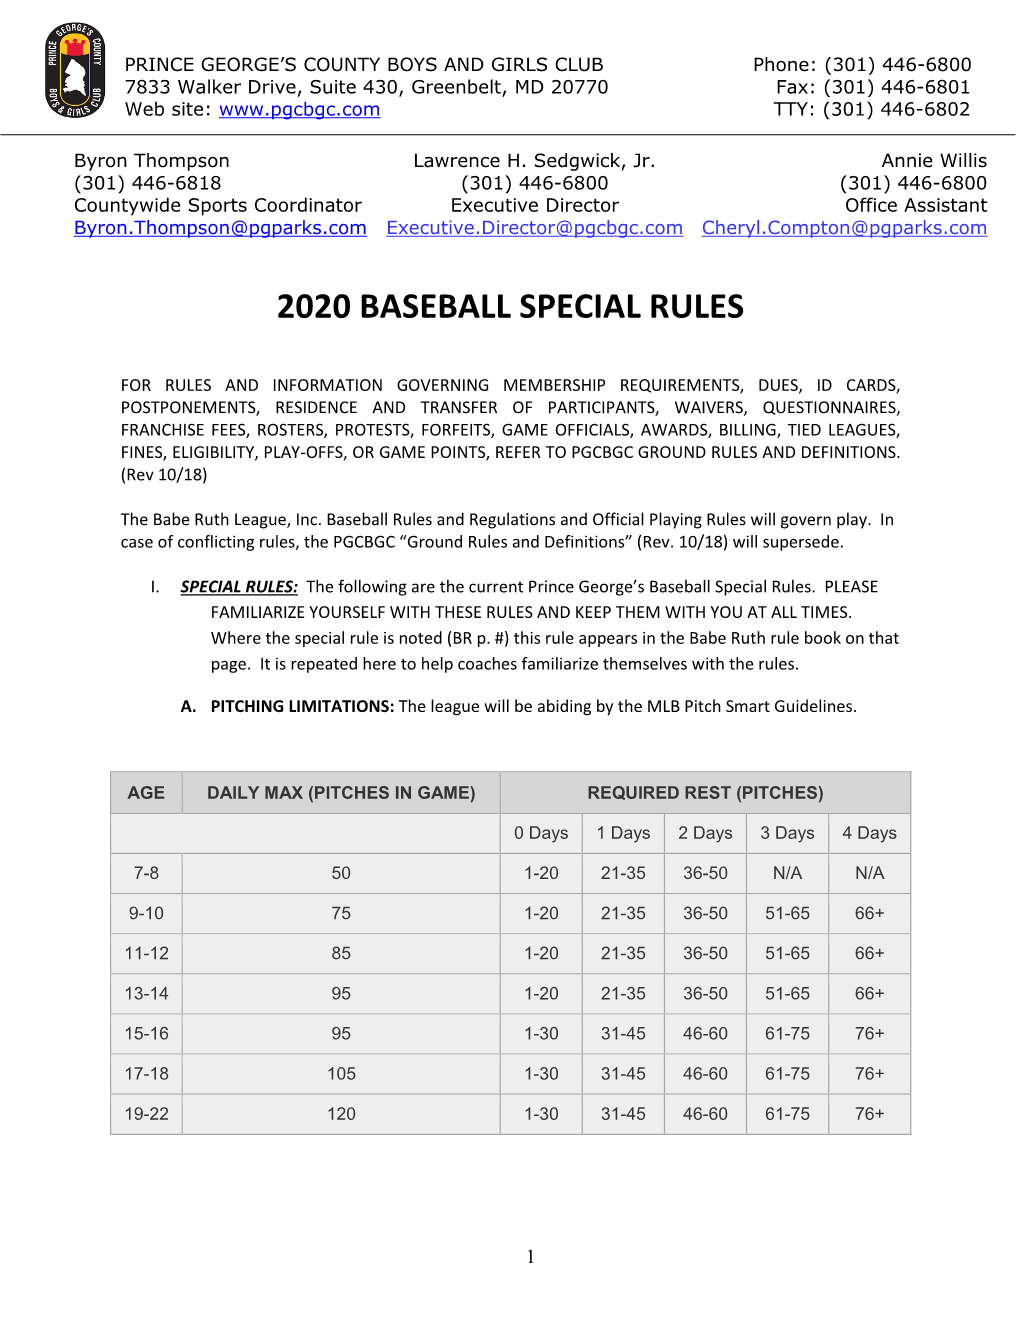 2020 Baseball Special Rules